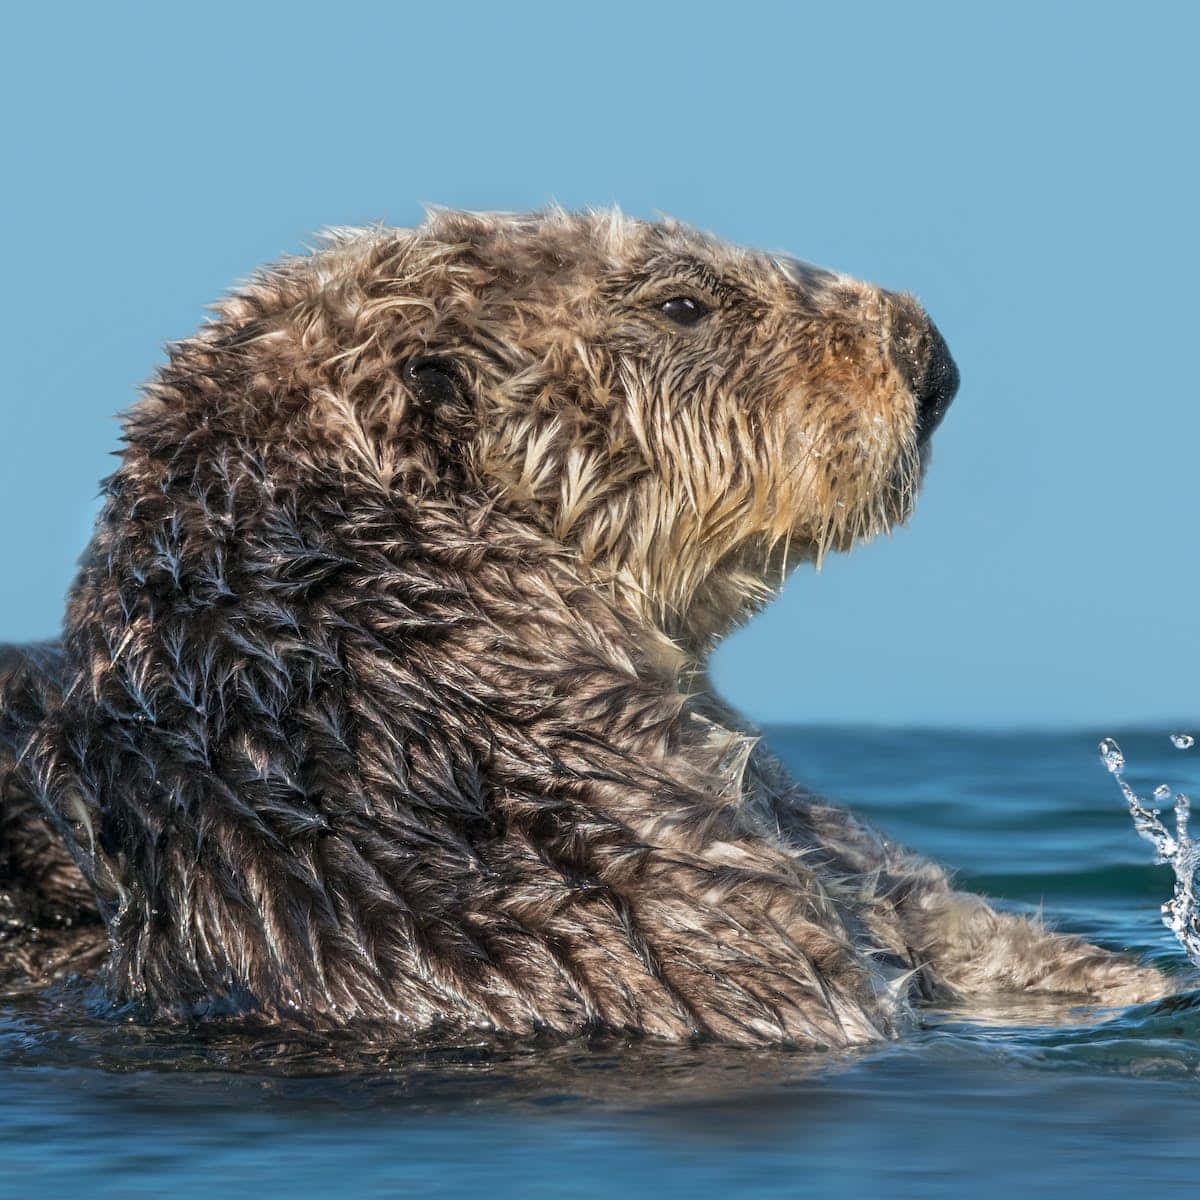 A Serene Day With A Playful Sea Otter